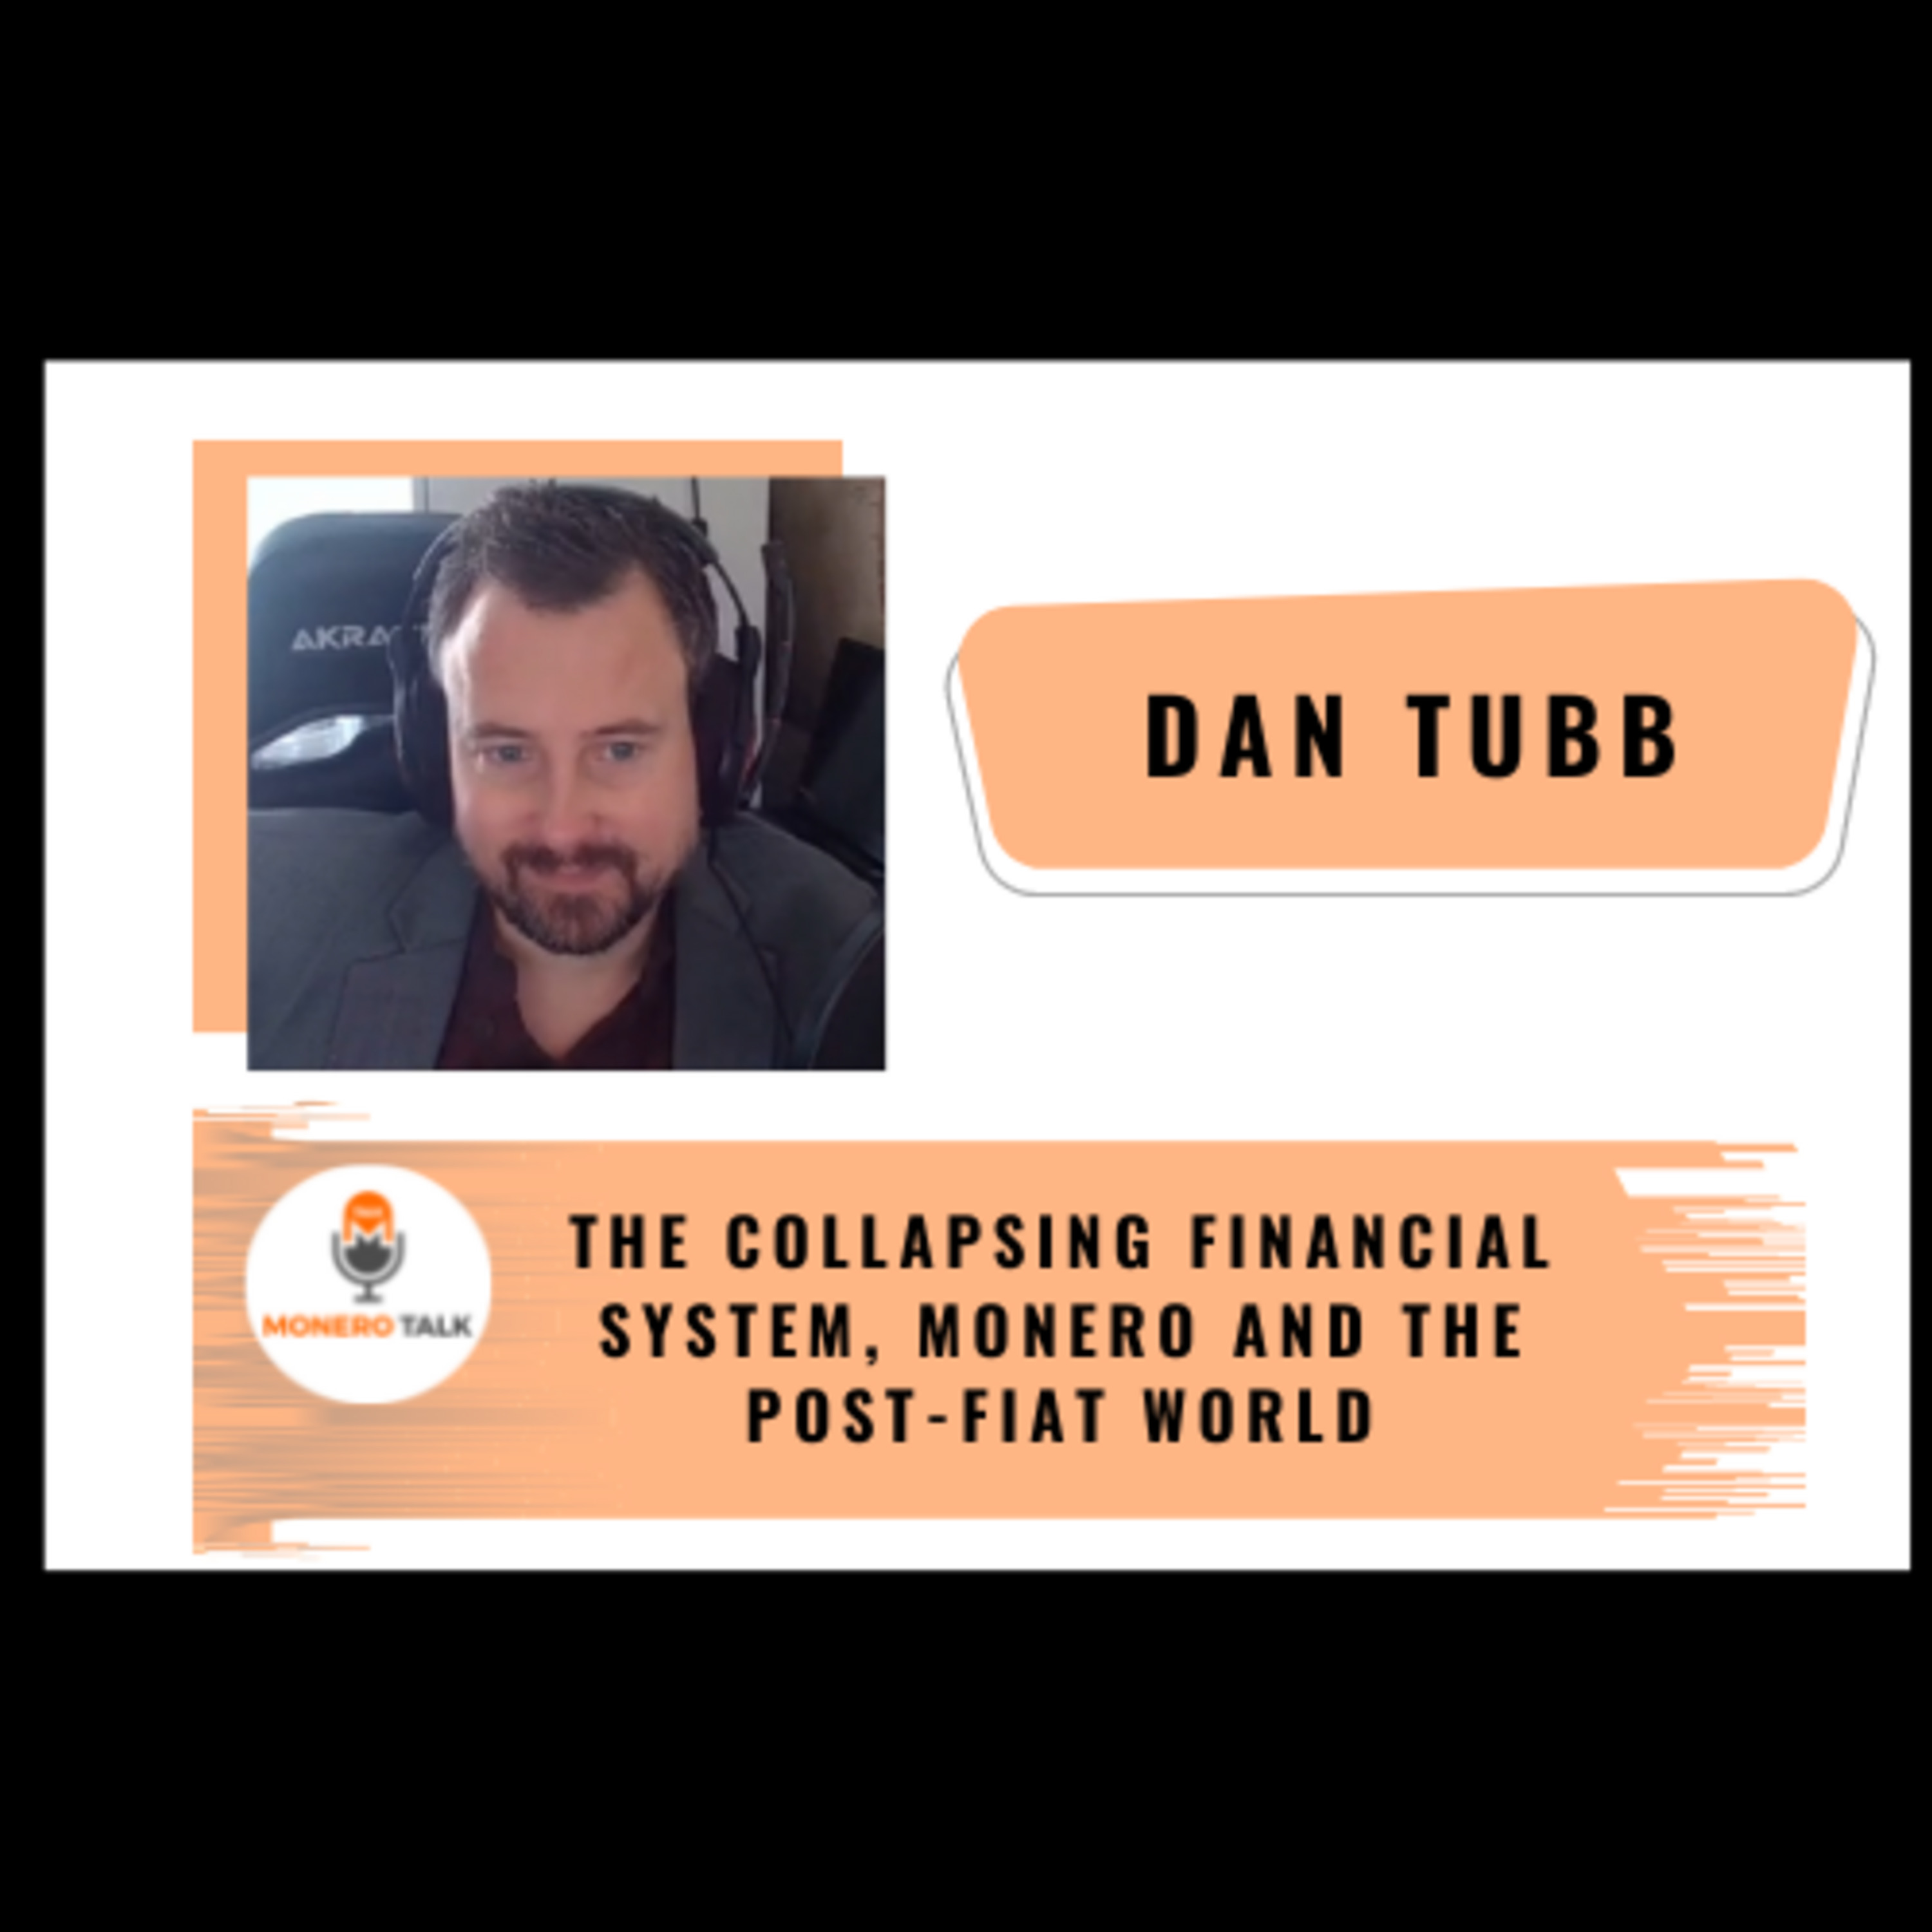 Dan Tubb - The collapsing financial system, Monero and the post-FIAT world